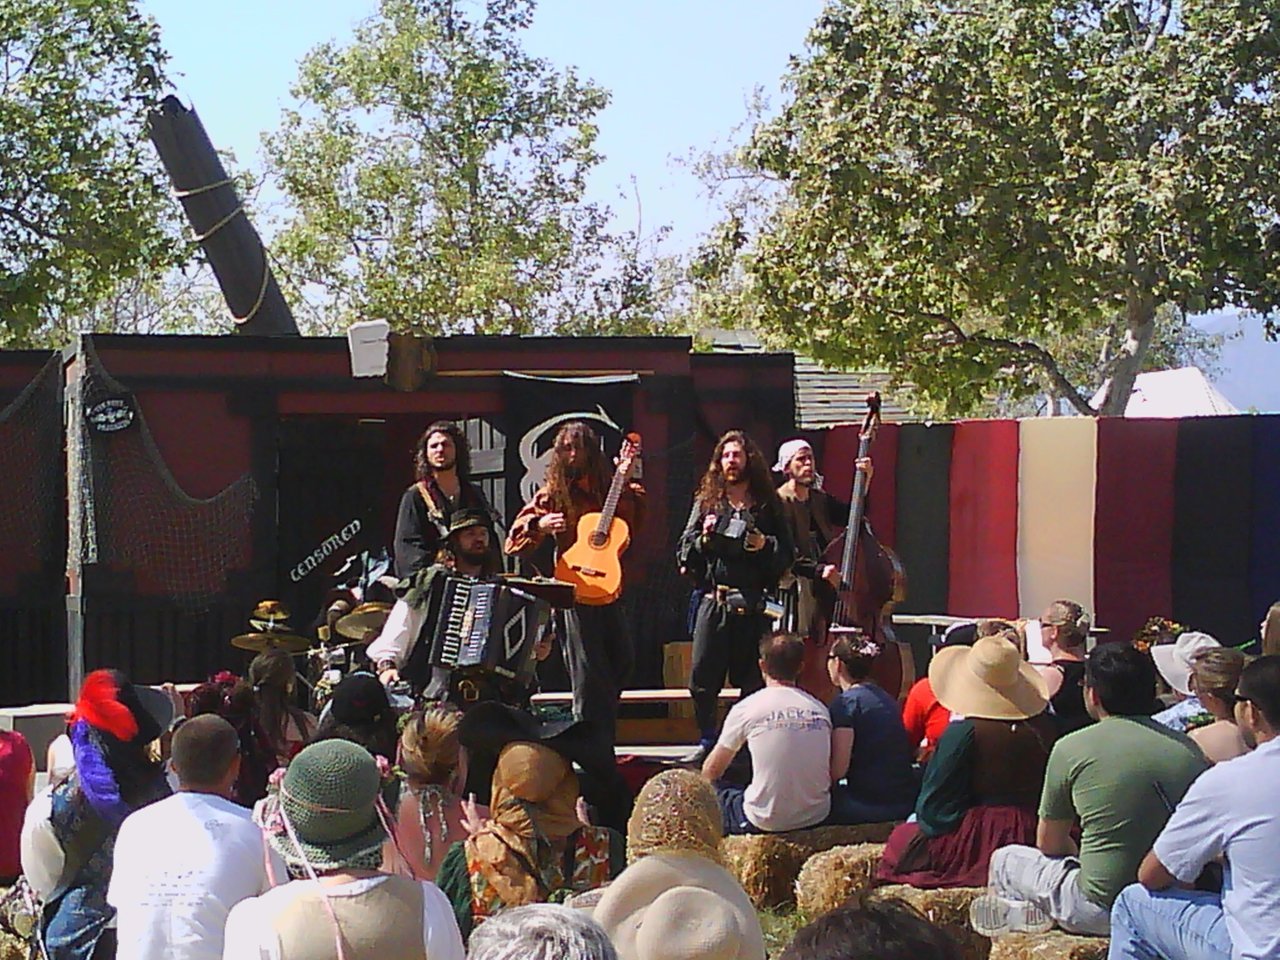 Went to a renaissance fair today saw this metal band there haha =]